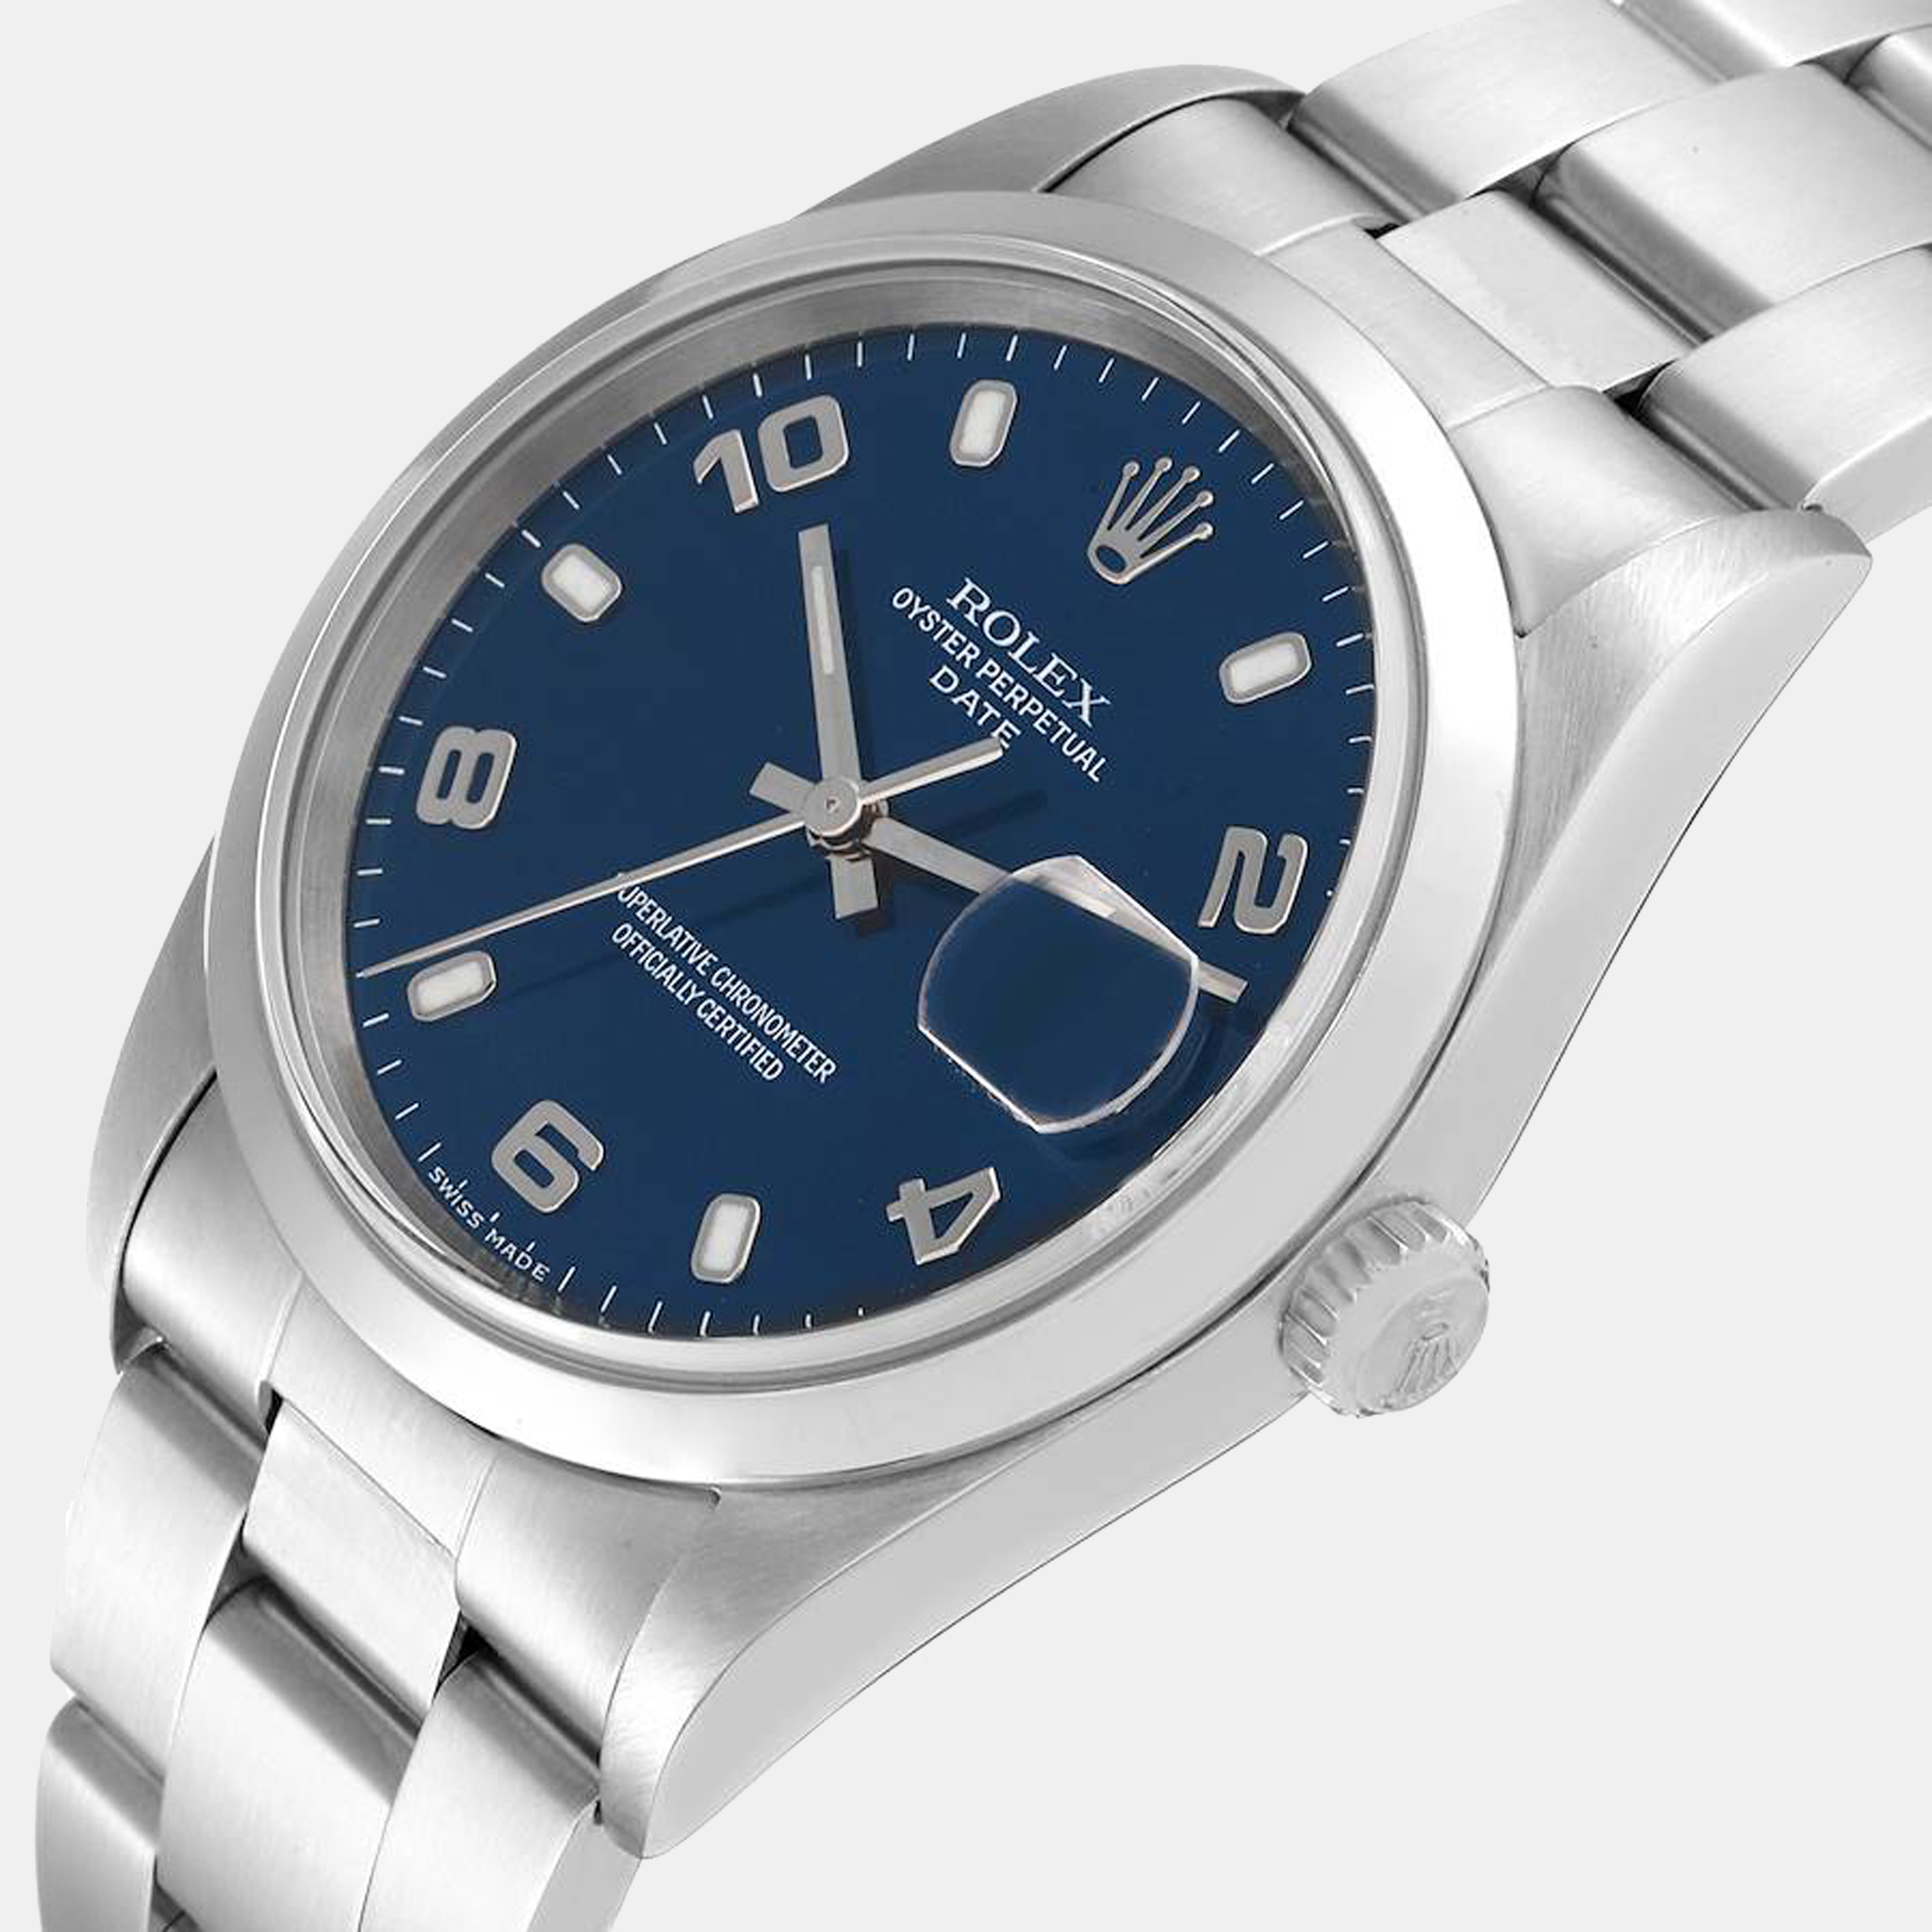 

Rolex Blue Stainless Steel Oyster Perpetual Date 15200 Men's Wristwatch 34 mm